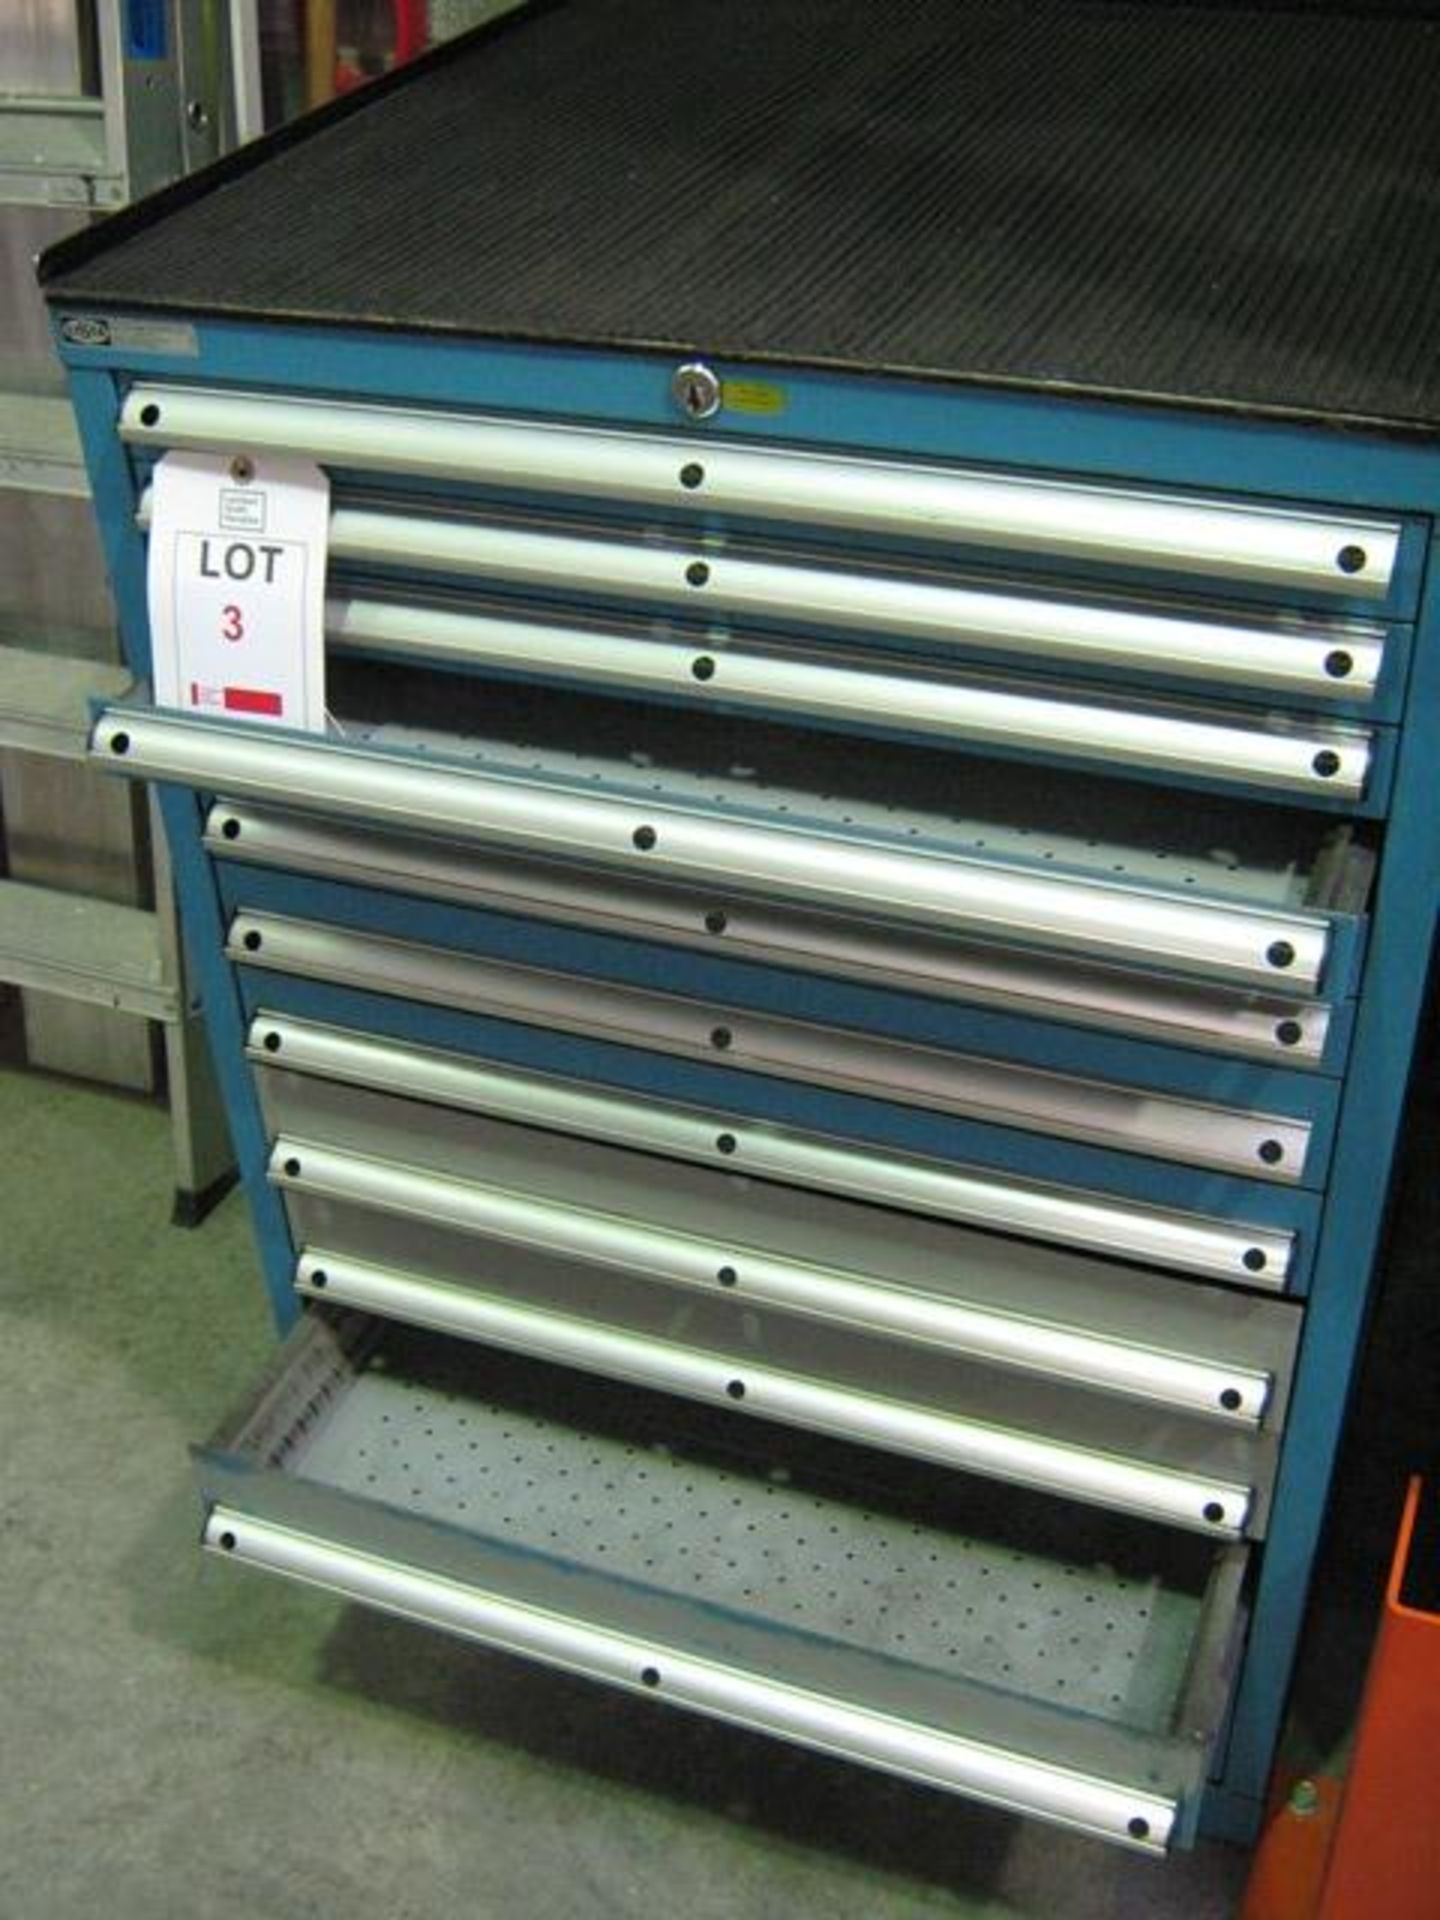 Lista 12 Drawer cabinet, approx. size: 28"x 28" x 40" High Loaded FOC to suitable transport - Image 2 of 2